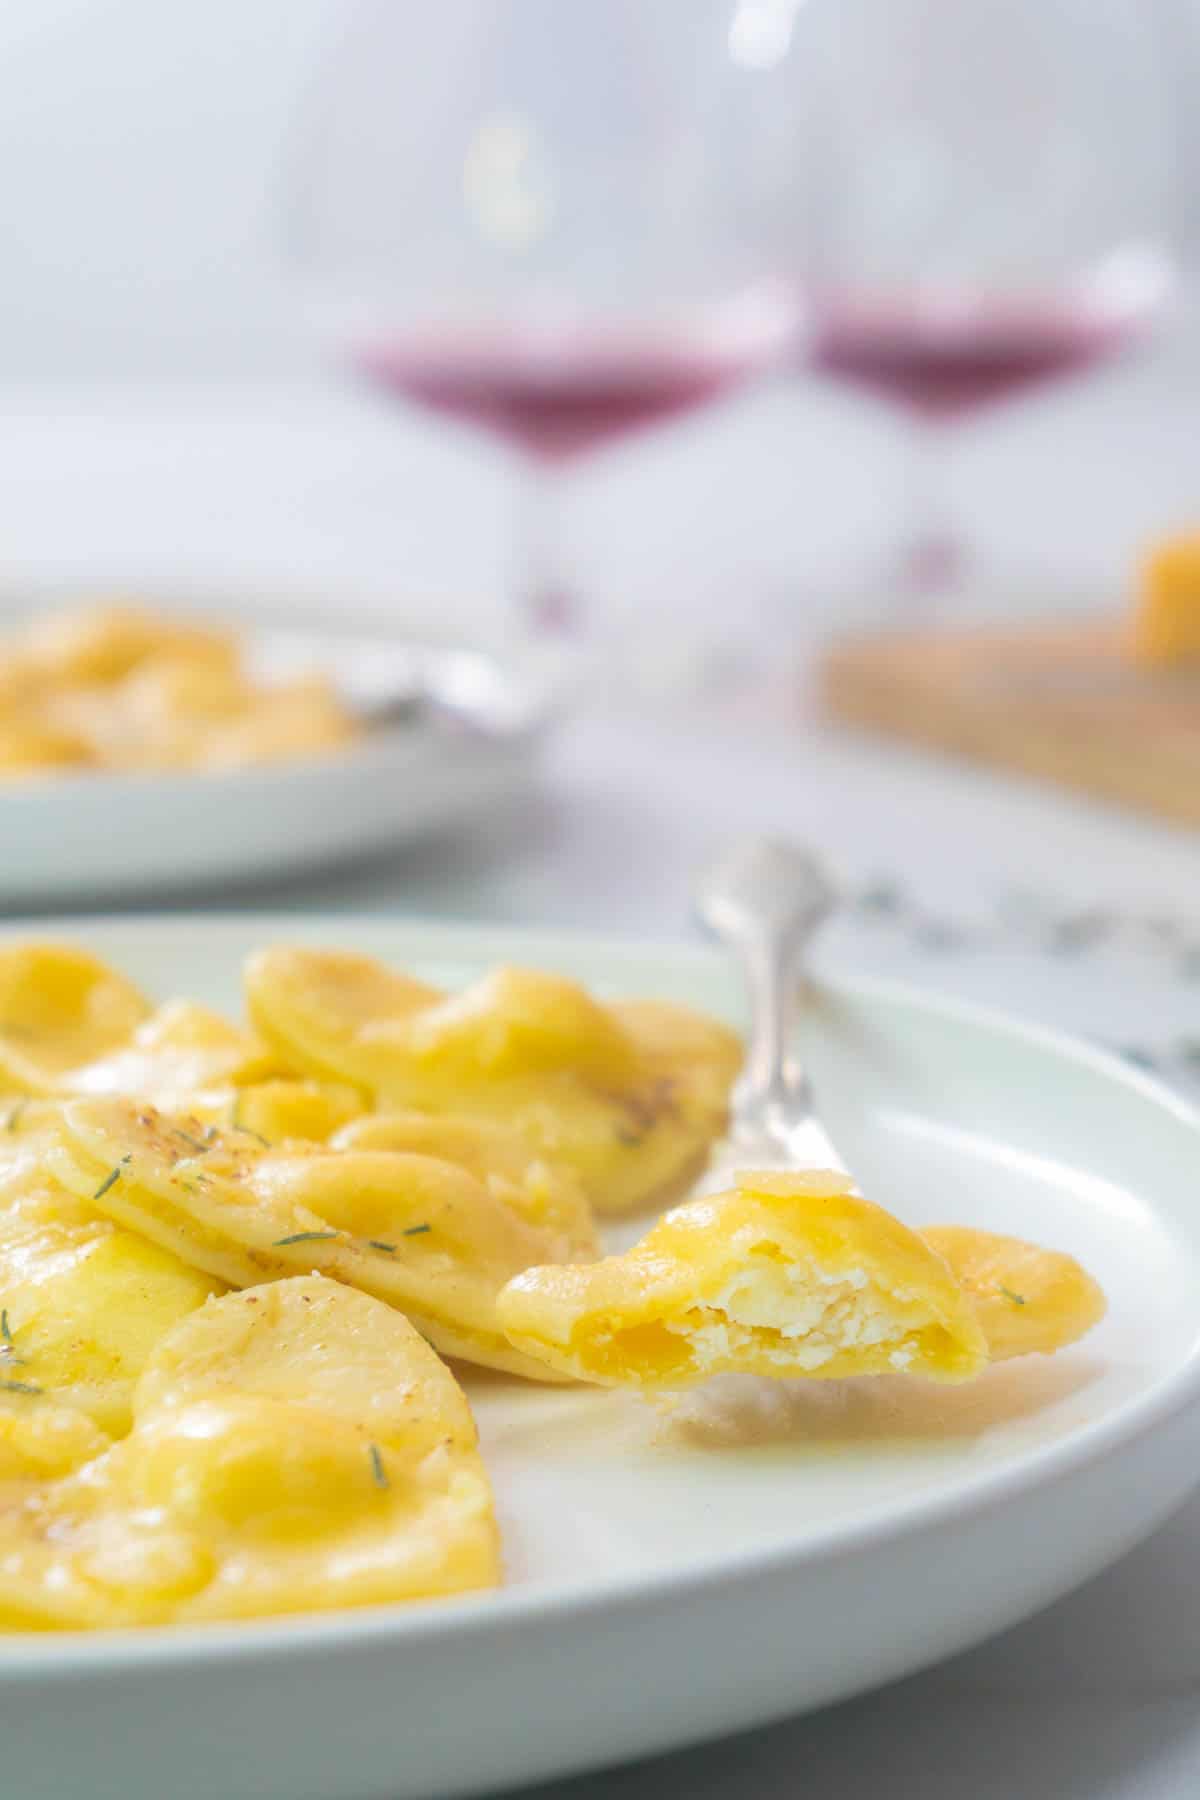 A ravioli piece that has been bitten into, revealing the cheese filling within.